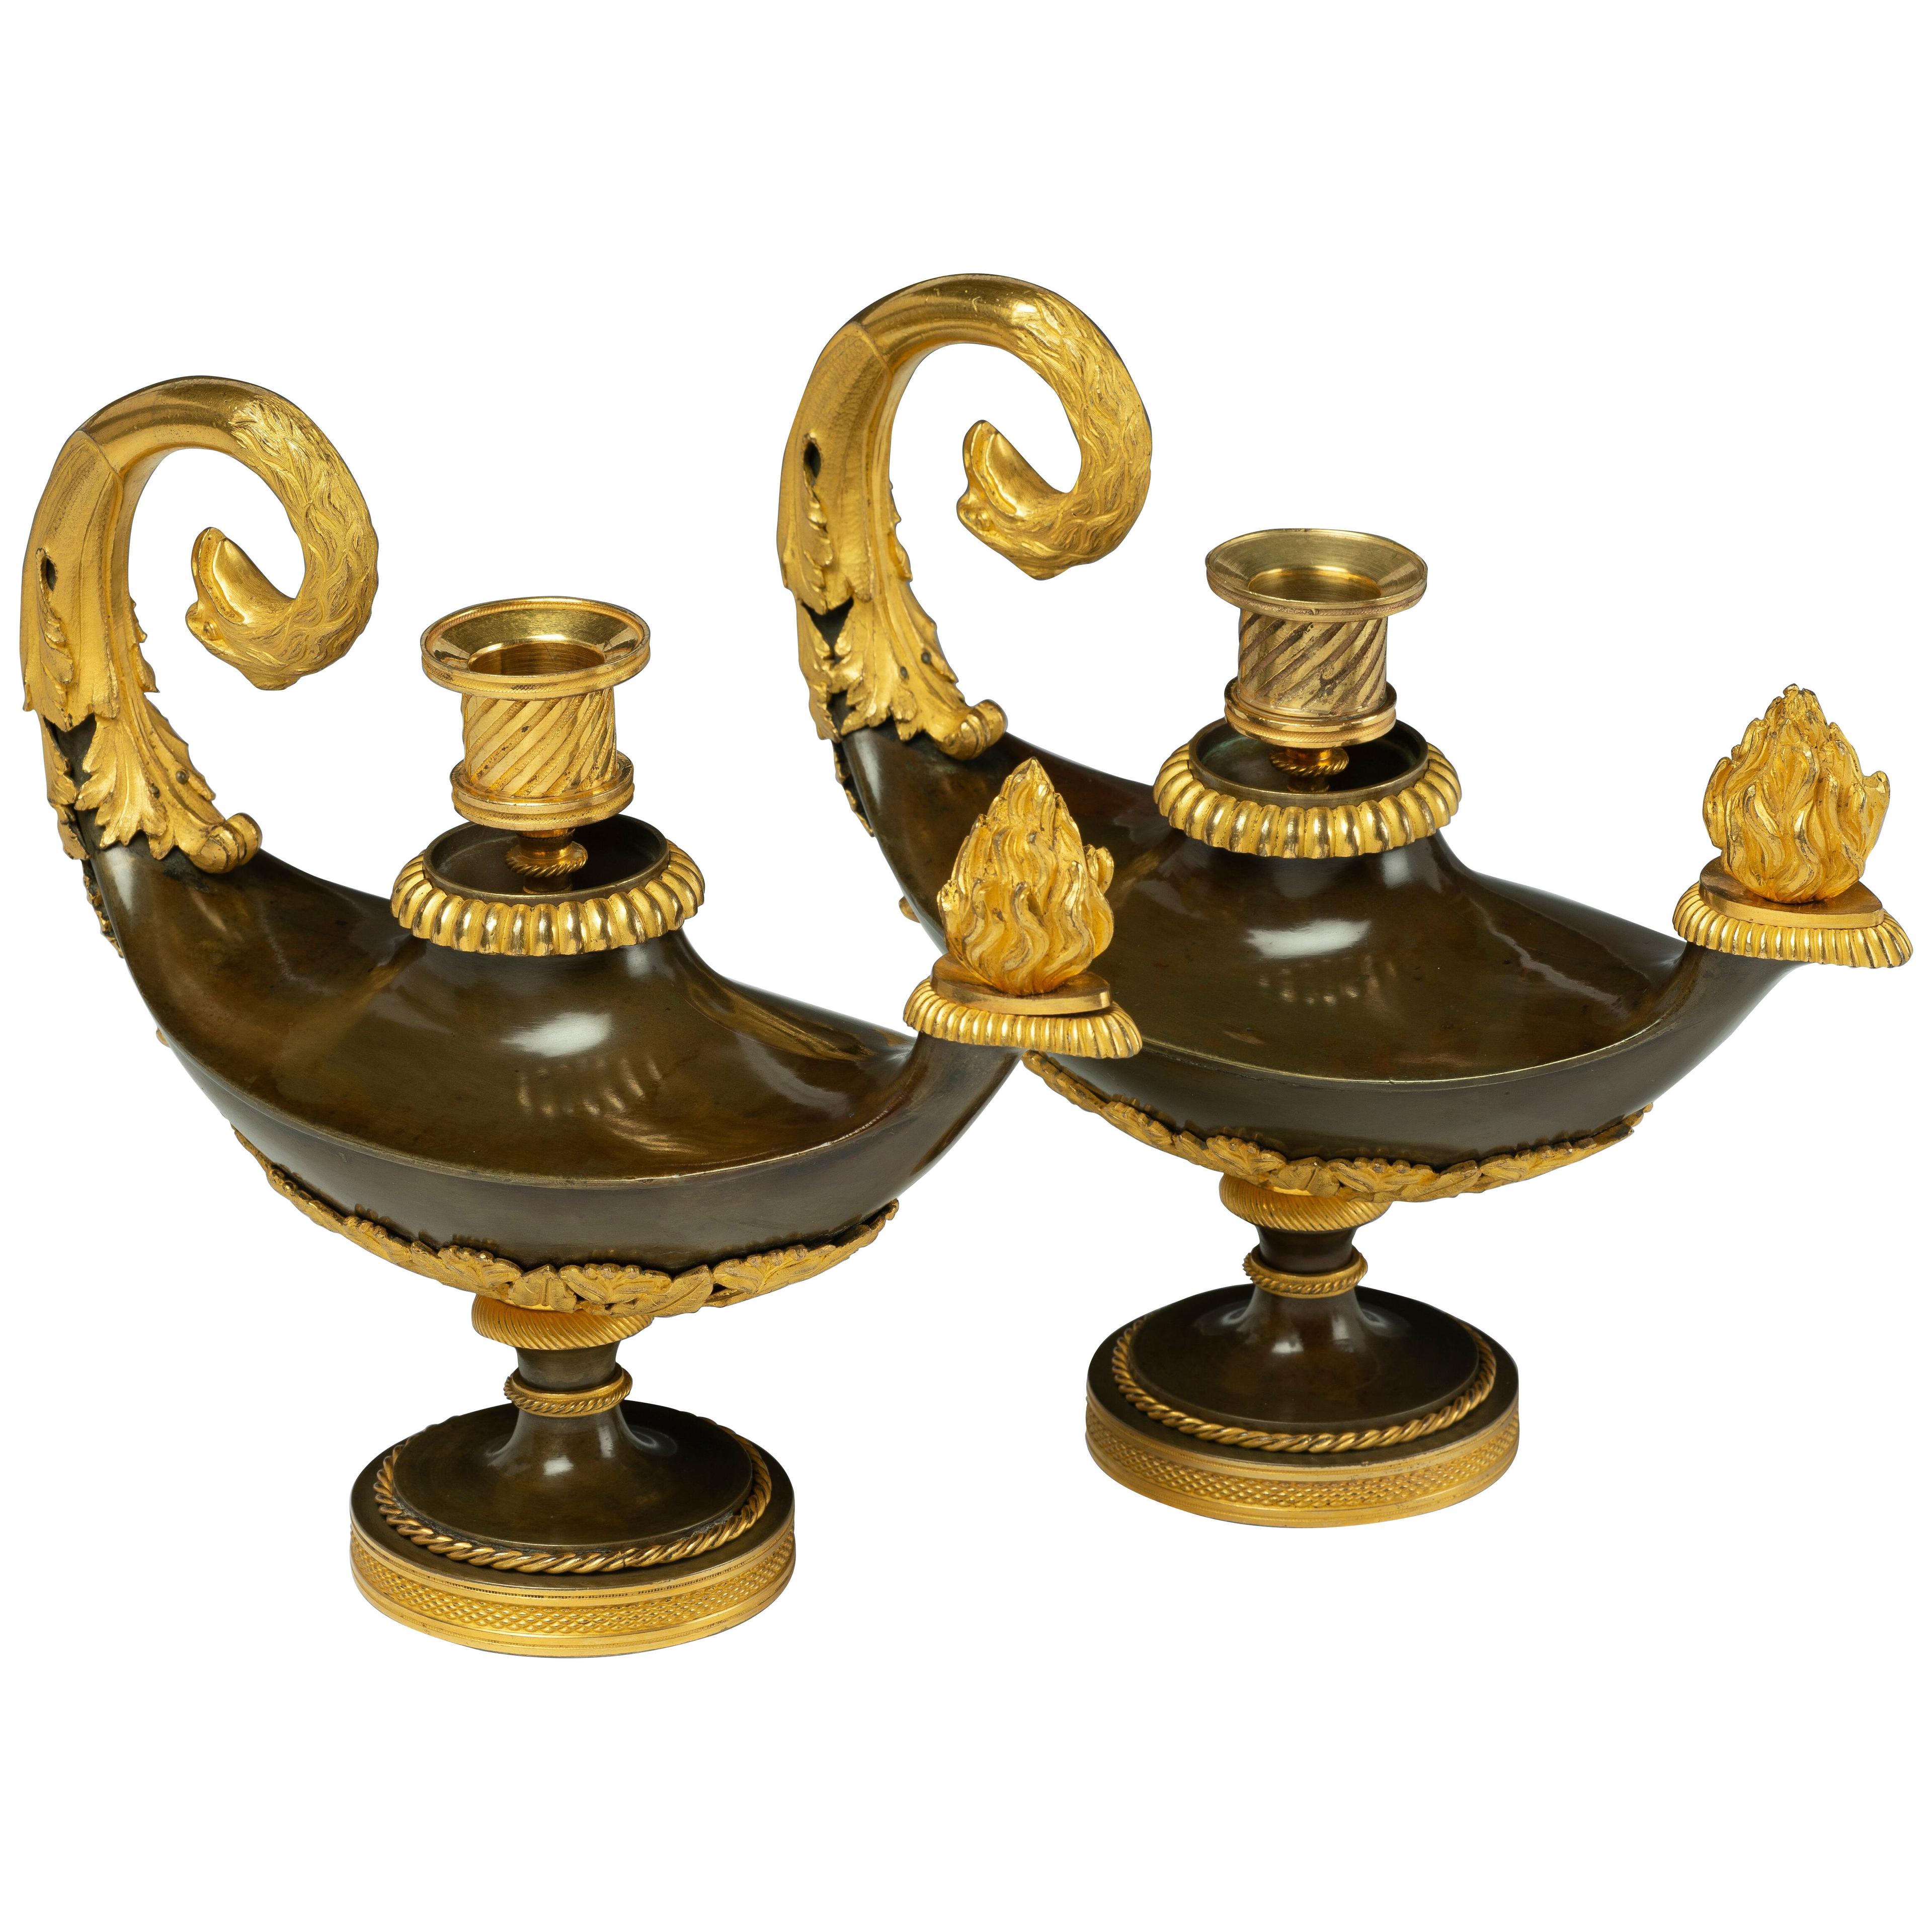 Pair of Regency Bronze and Ormolu-mounted Cassolettes